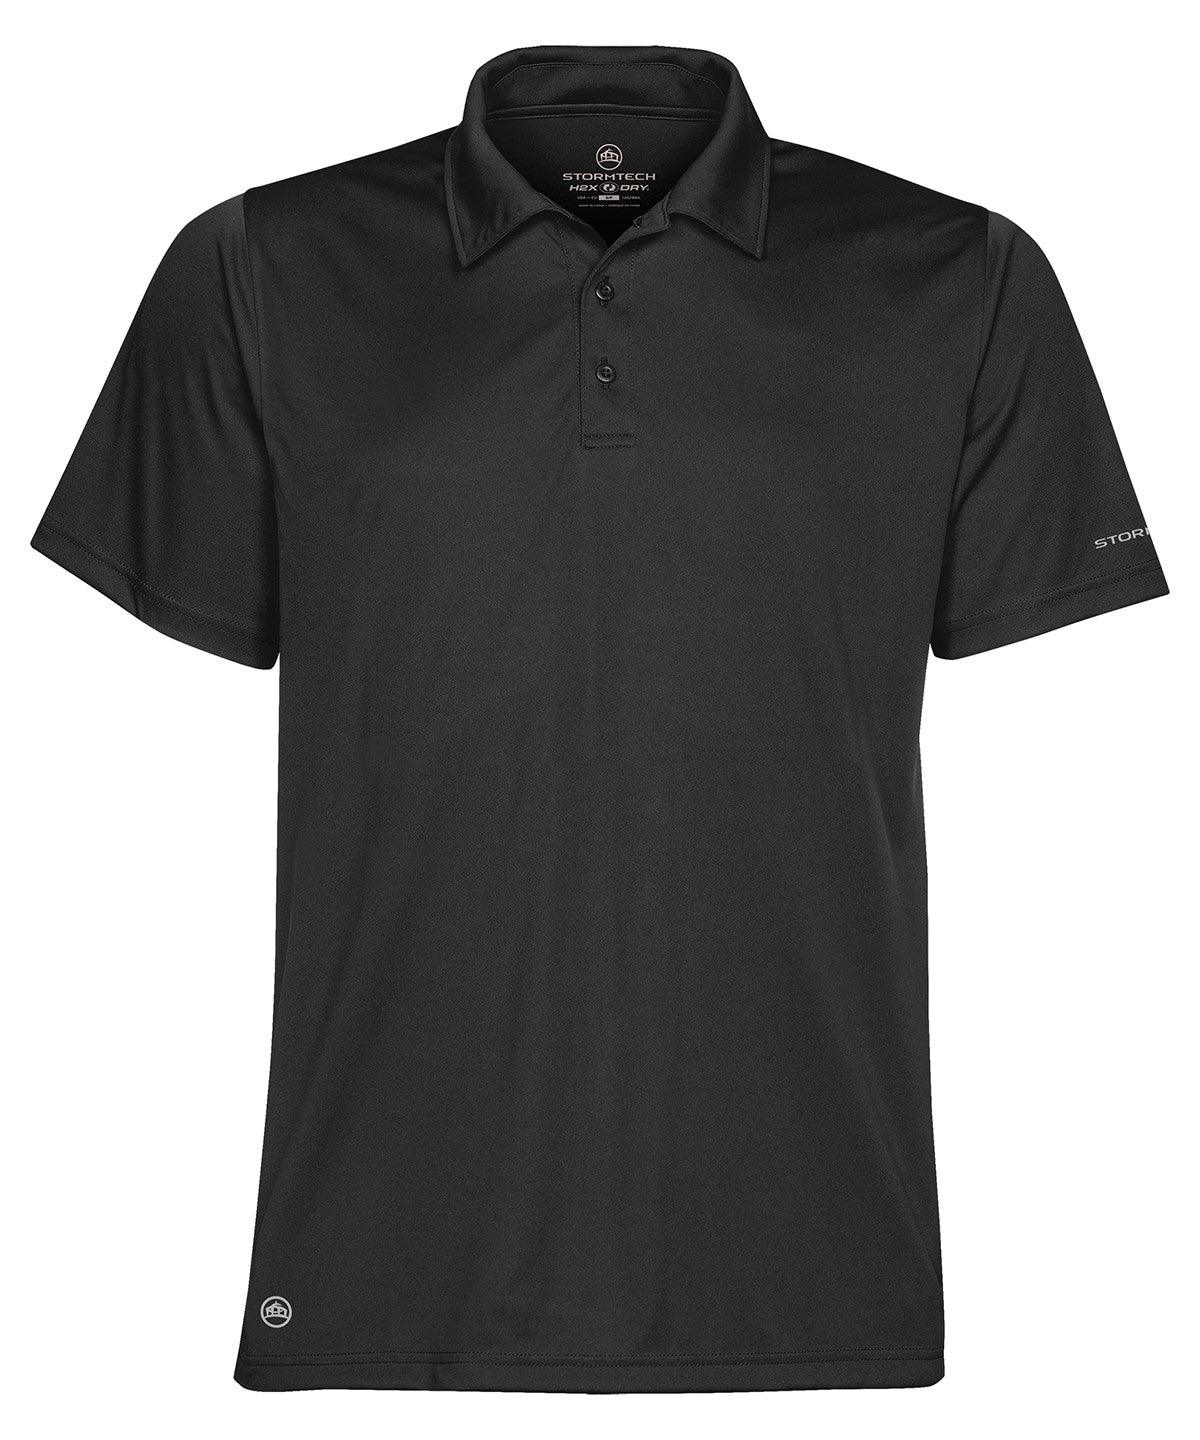 Black - Sports performance polo Polos Stormtech Activewear & Performance, Must Haves, Polos & Casual Schoolwear Centres